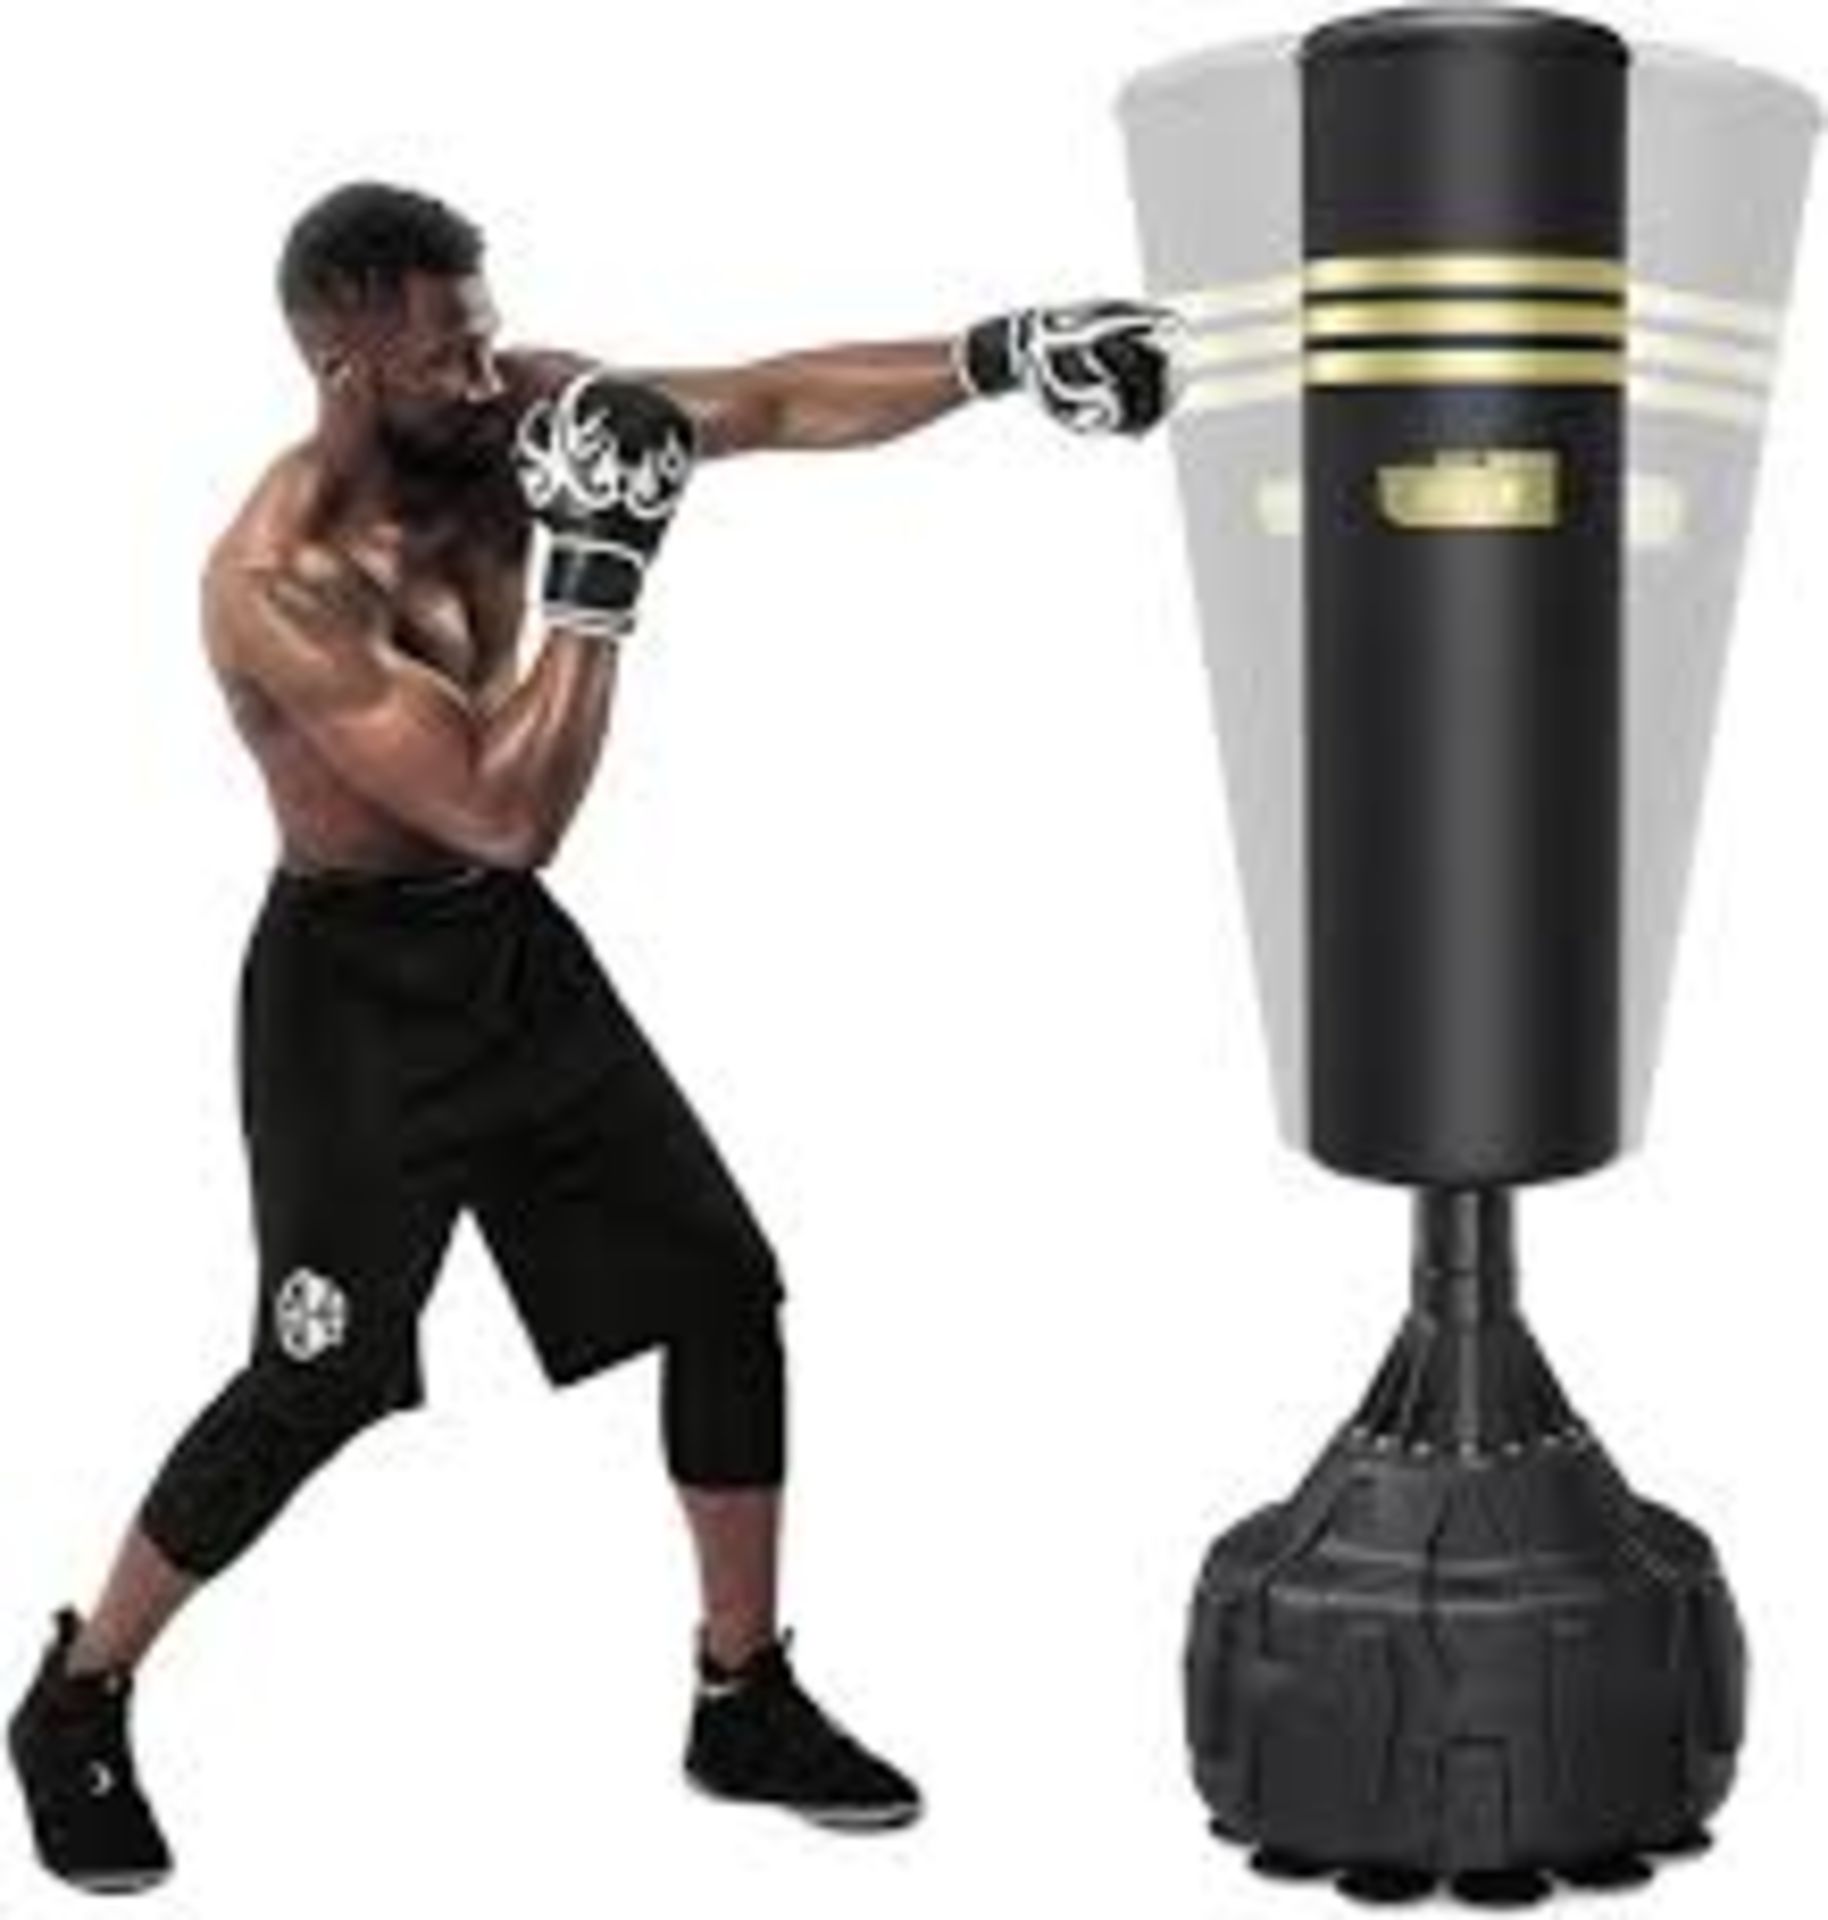 LOT CONTAINING 10 X FREE STANDING PUNCH BAGS WITH STAND BRAND NEW